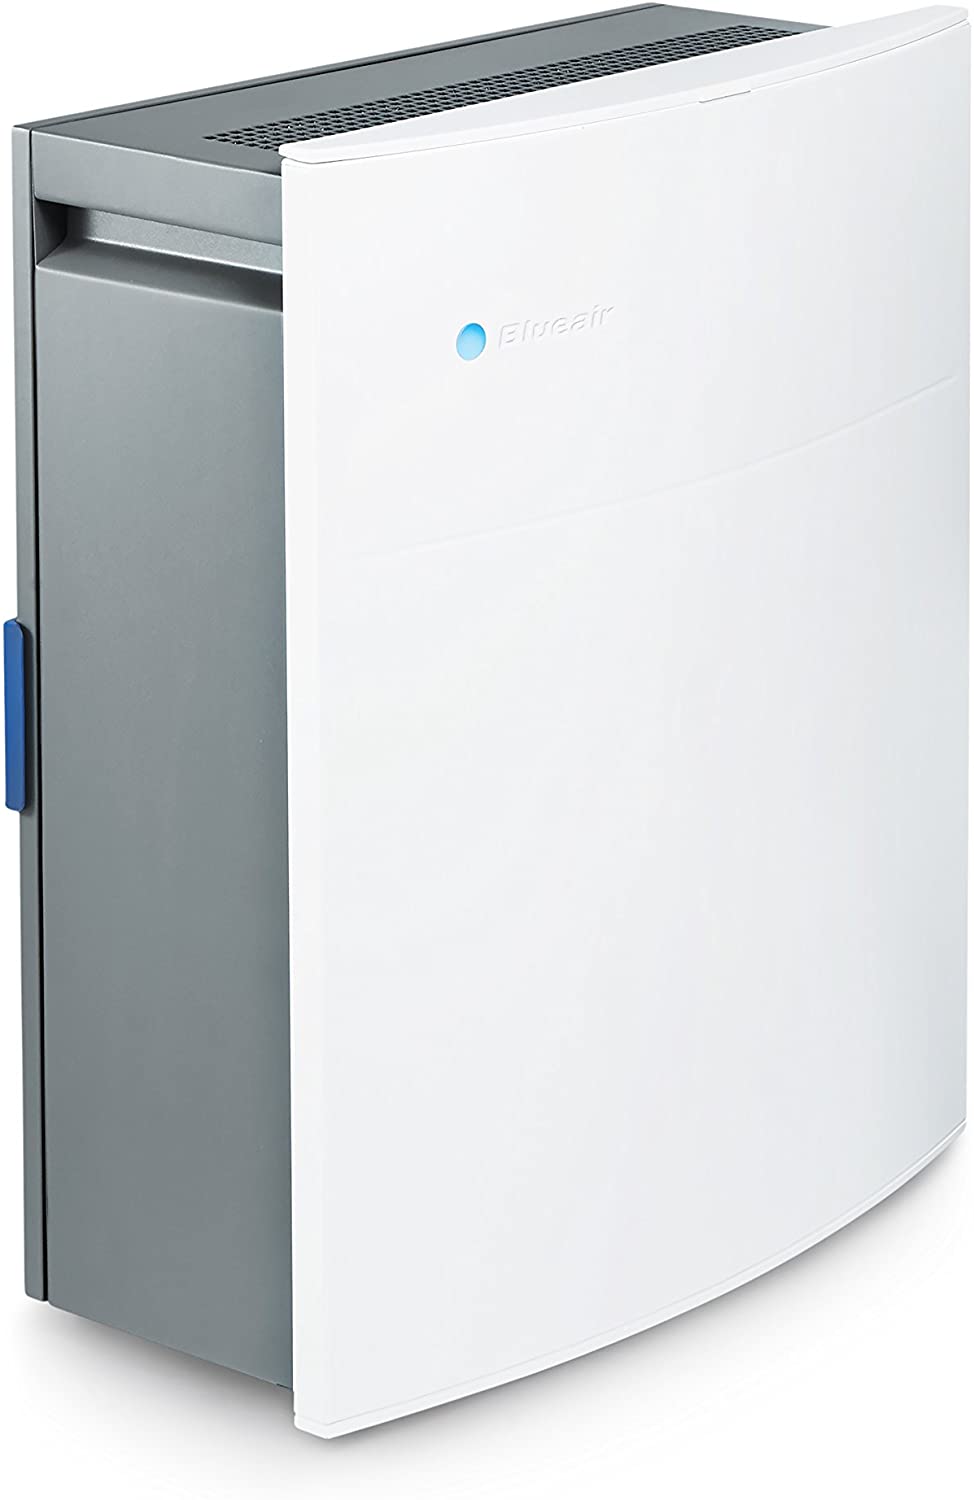 Blueair Classic 205 - Air Purifier With HEPASilent Smokestop Filter With WiFi - Small Room - White 5 Years Warranty